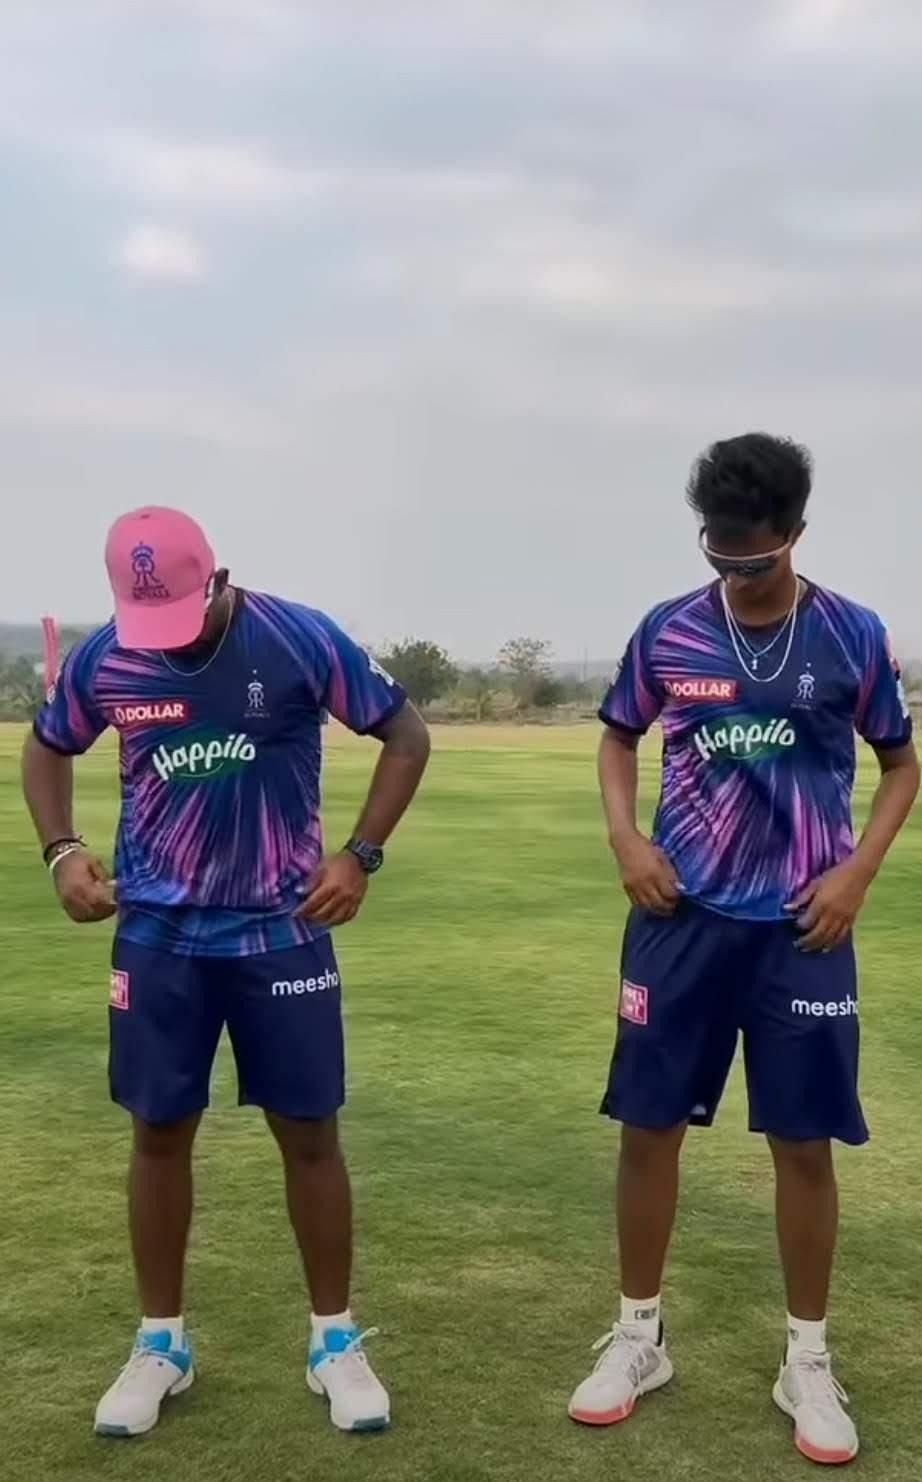 KC Cariappa and Tejas Baroka were picked by the Rajasthan Royals in the recent IPL mega-auction [Image- Screengrab/RR Insta]